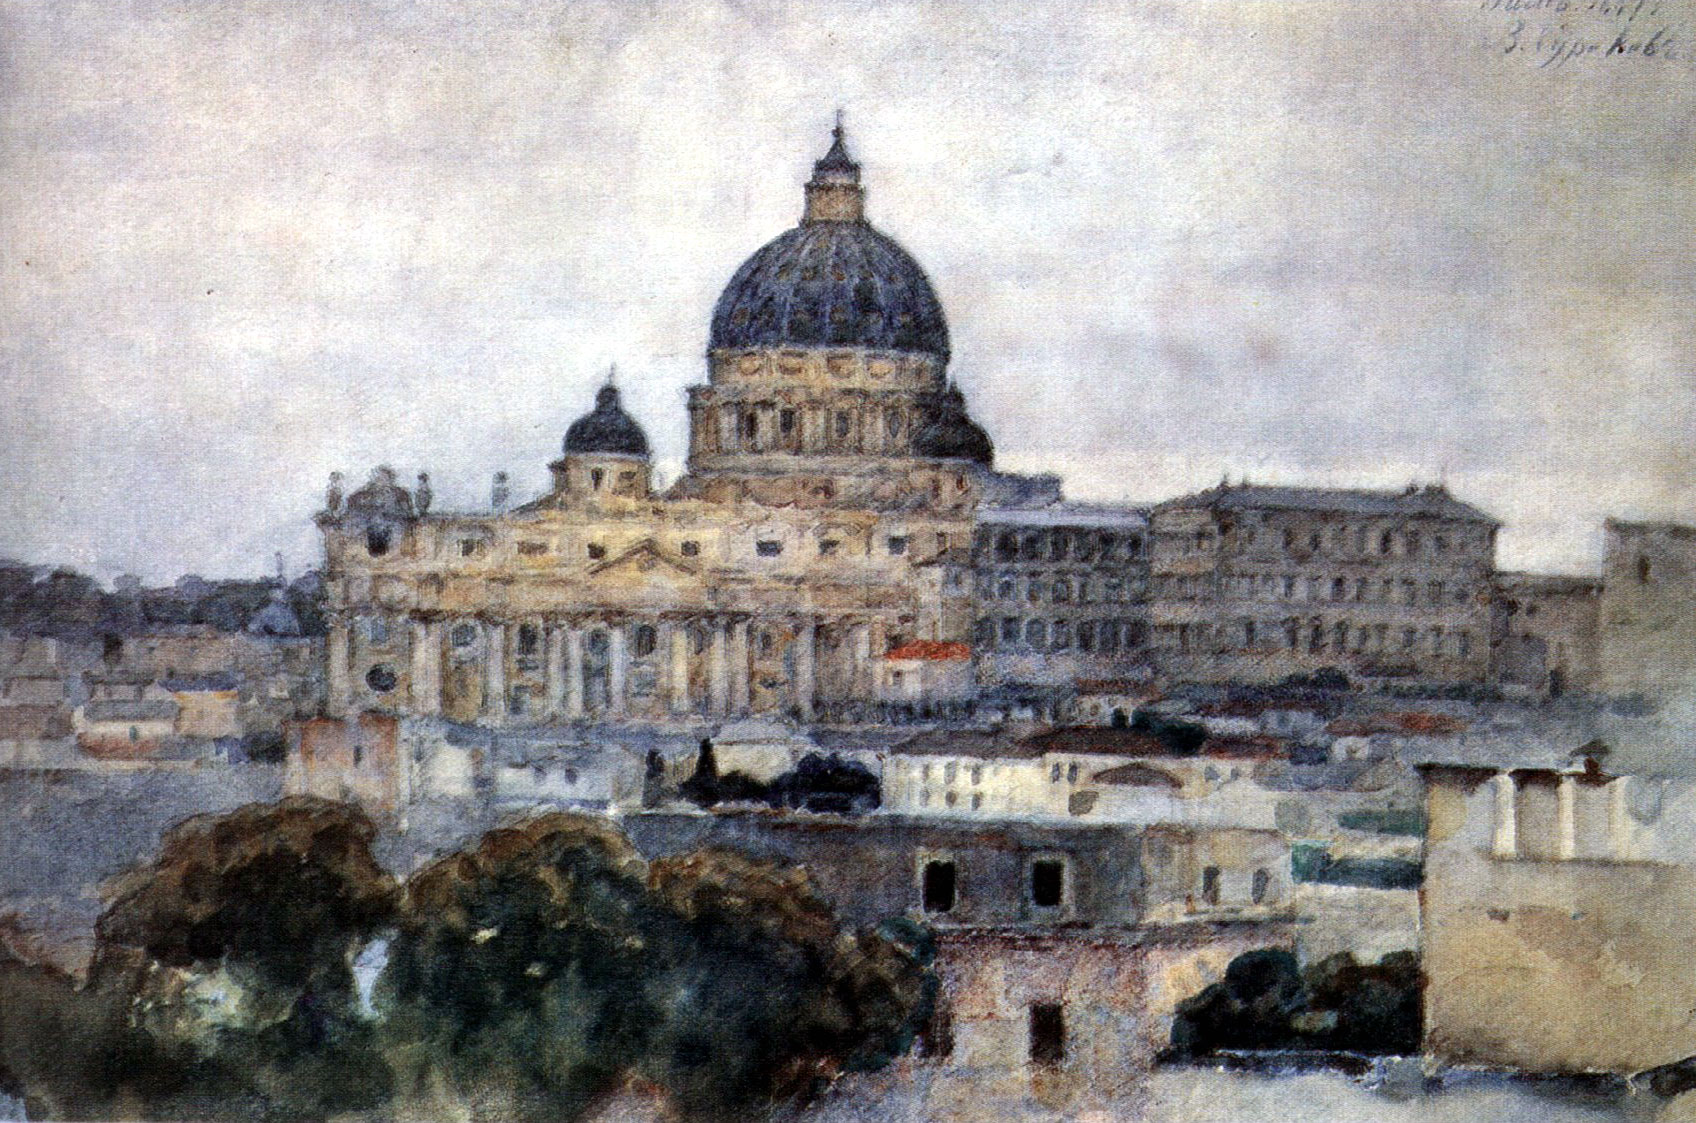 Saint Peter's Cathedral in Rome (1884).